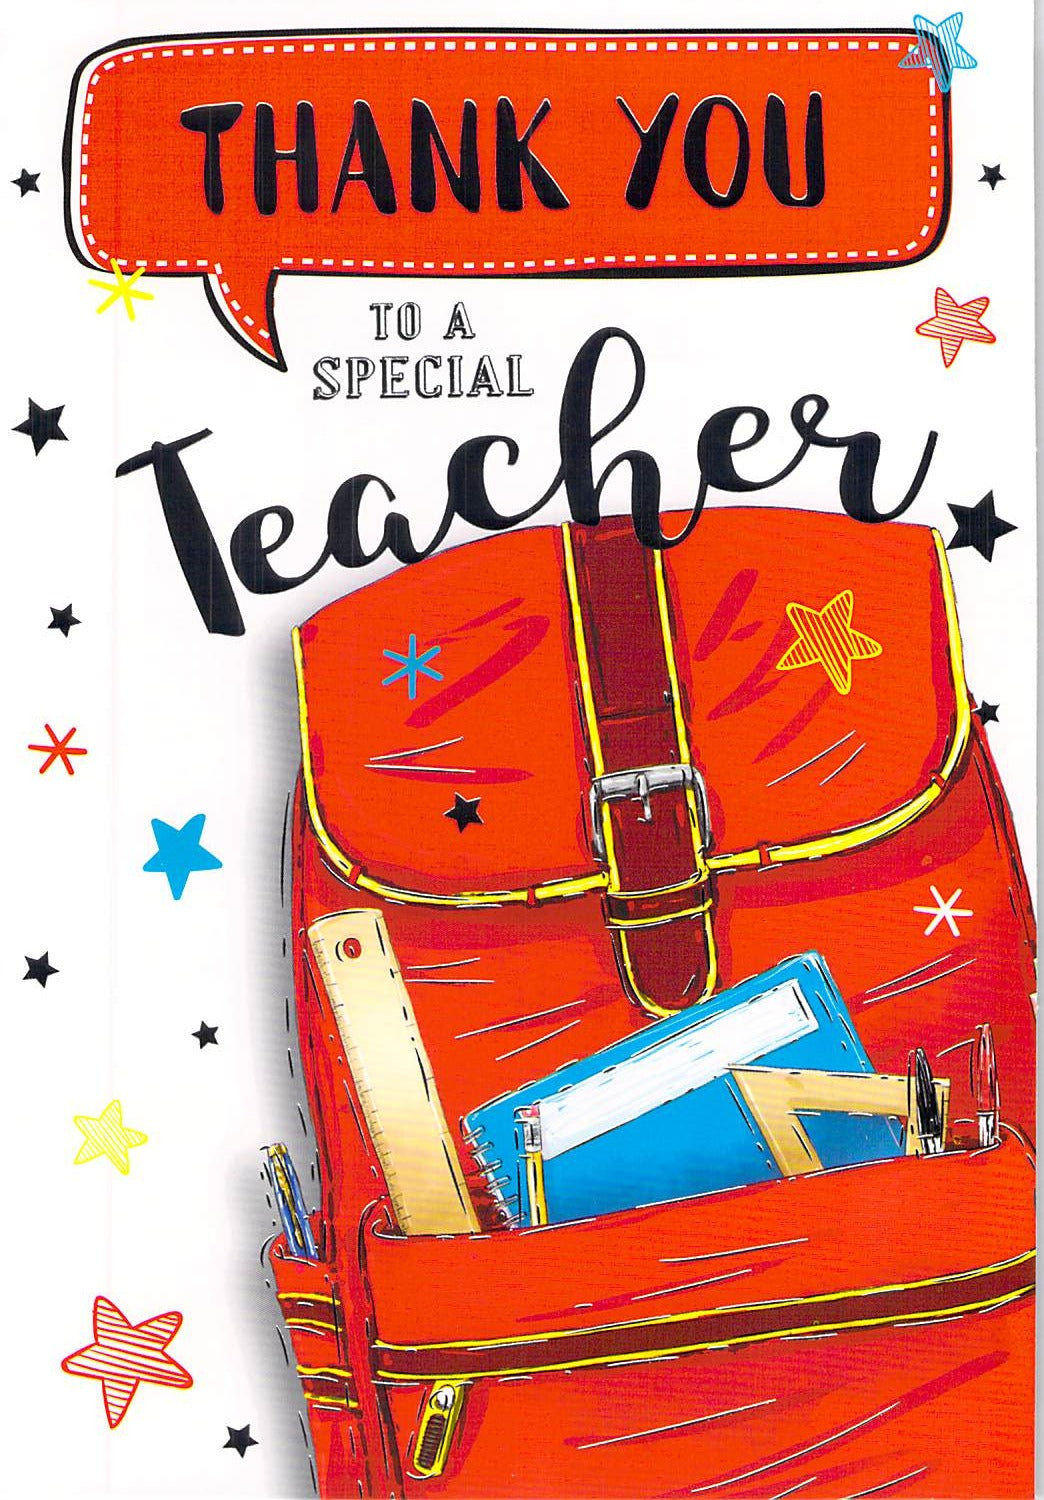 Thank You To A Special Teacher - Greeting Card - Free Postage